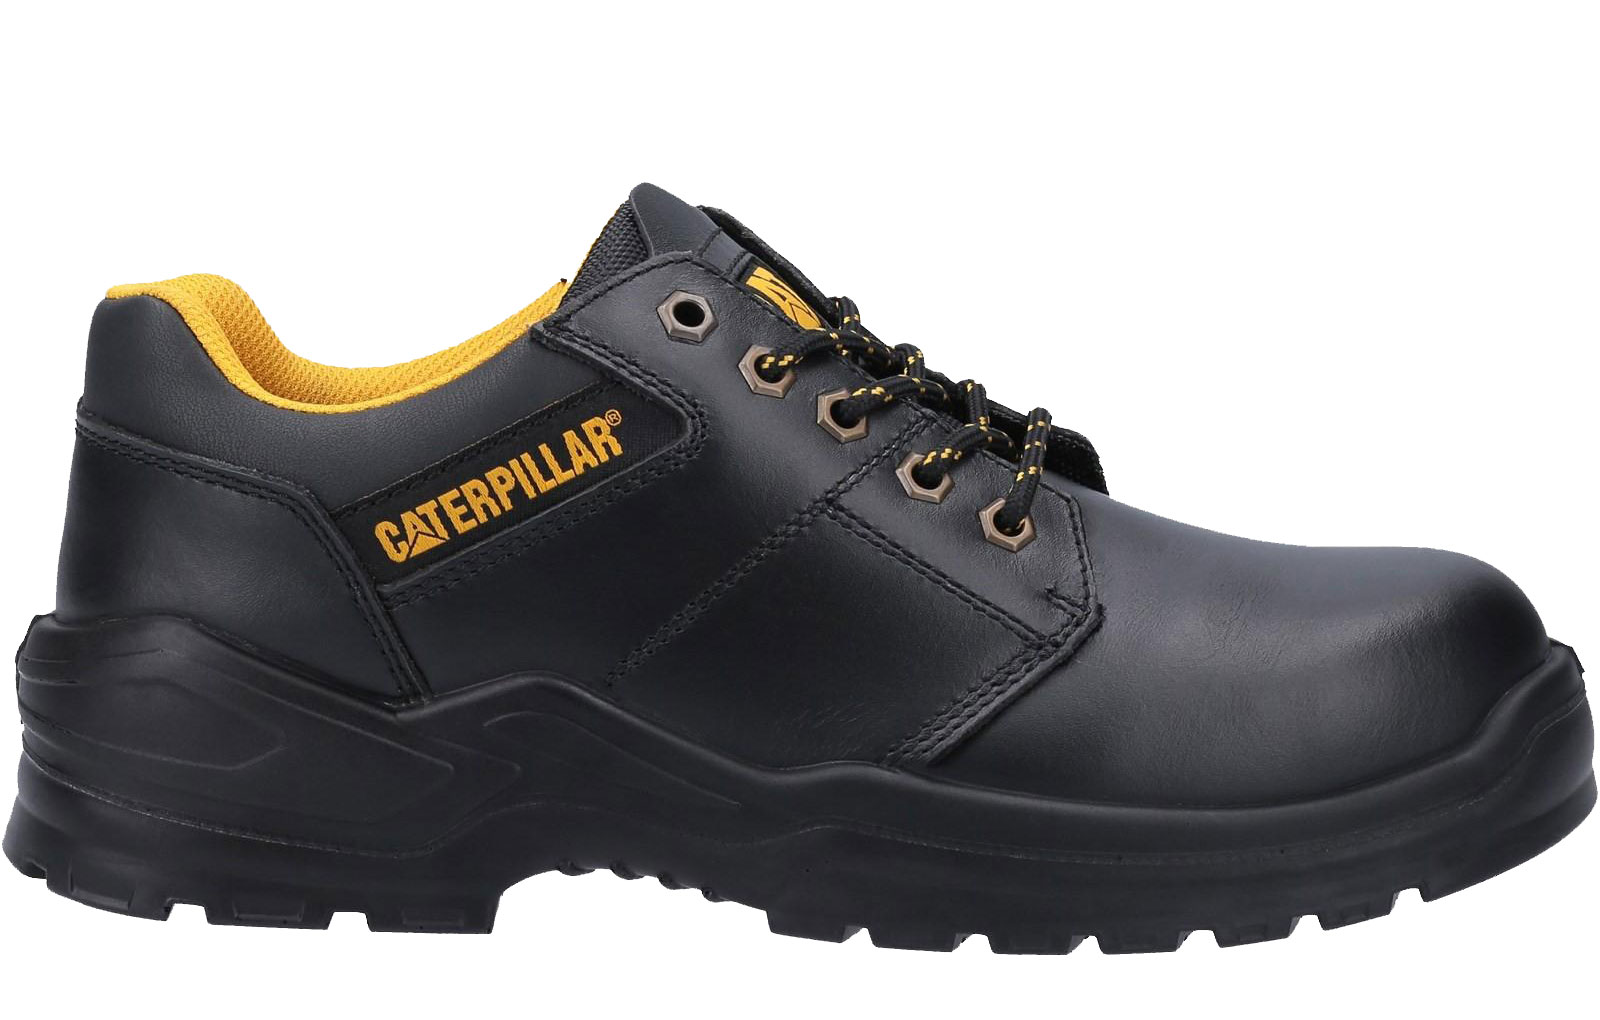 Caterpillar Striver S3 Low Safety Shoes Mens - GRD-31899-54611-03